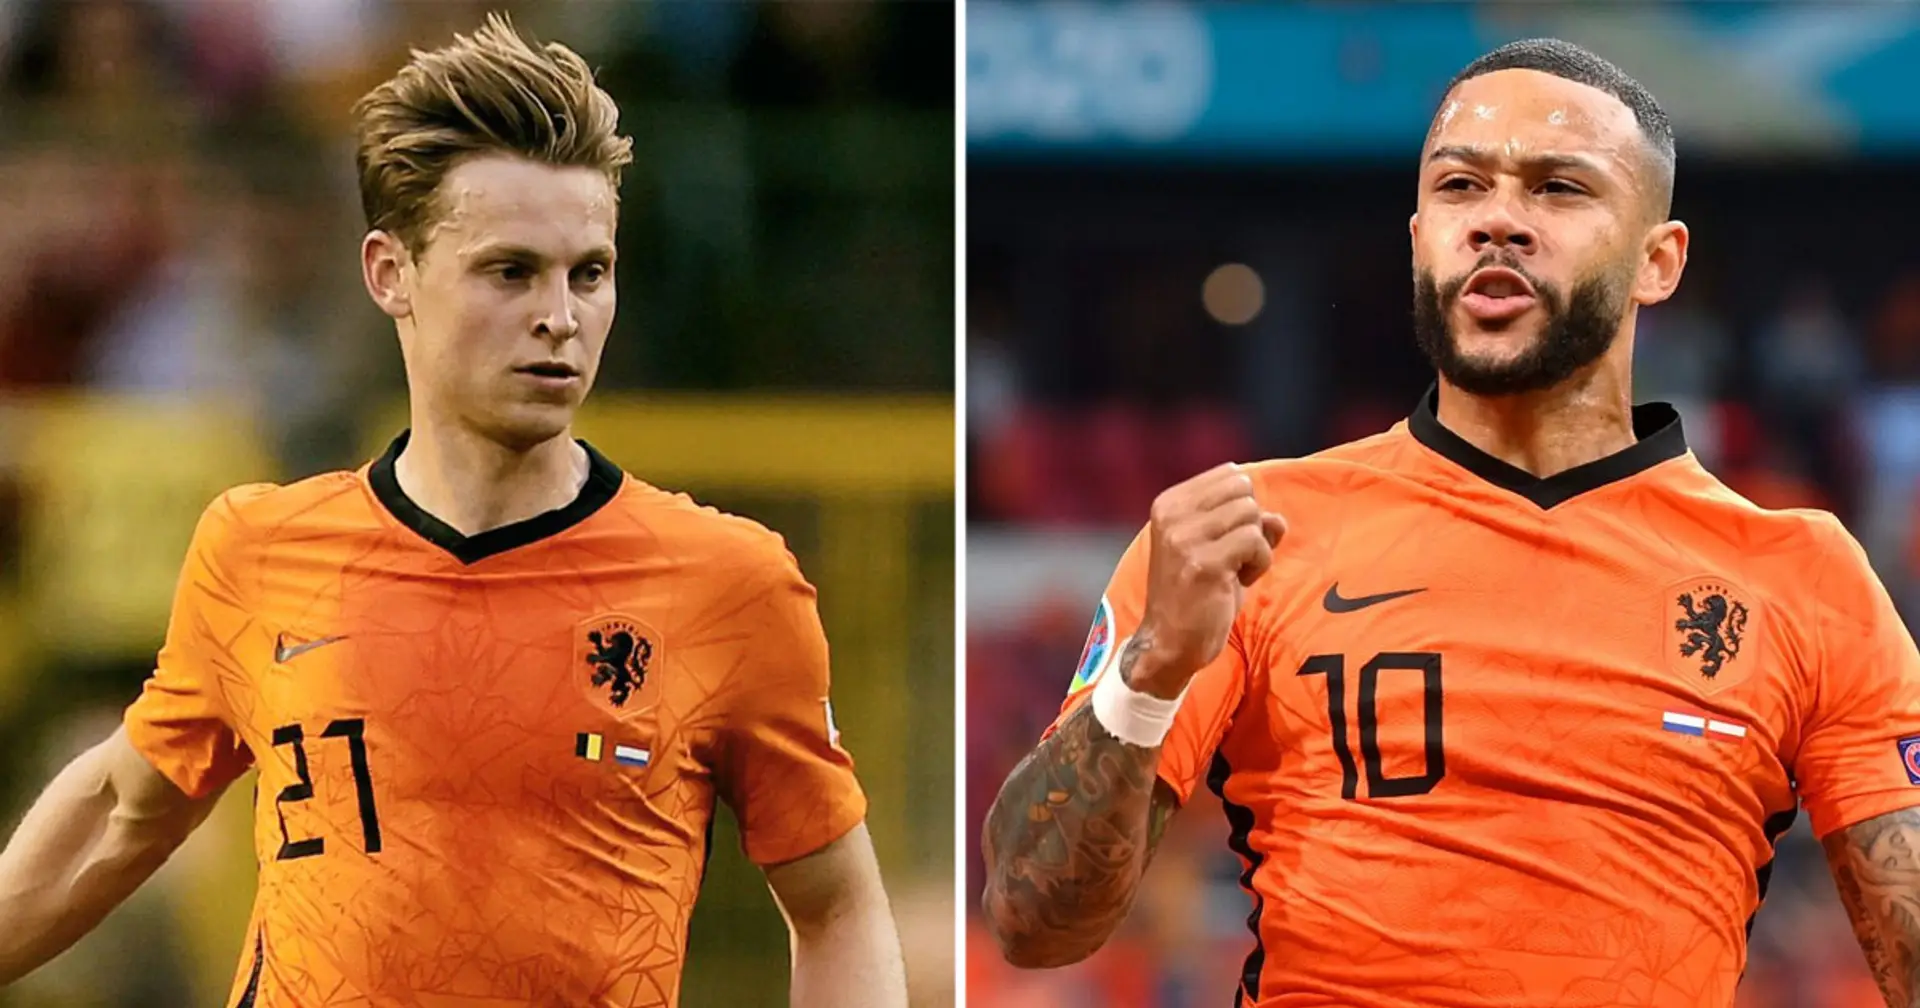 Frenkie and Memphis deliver masterclasses as Netherlands smash Belgium